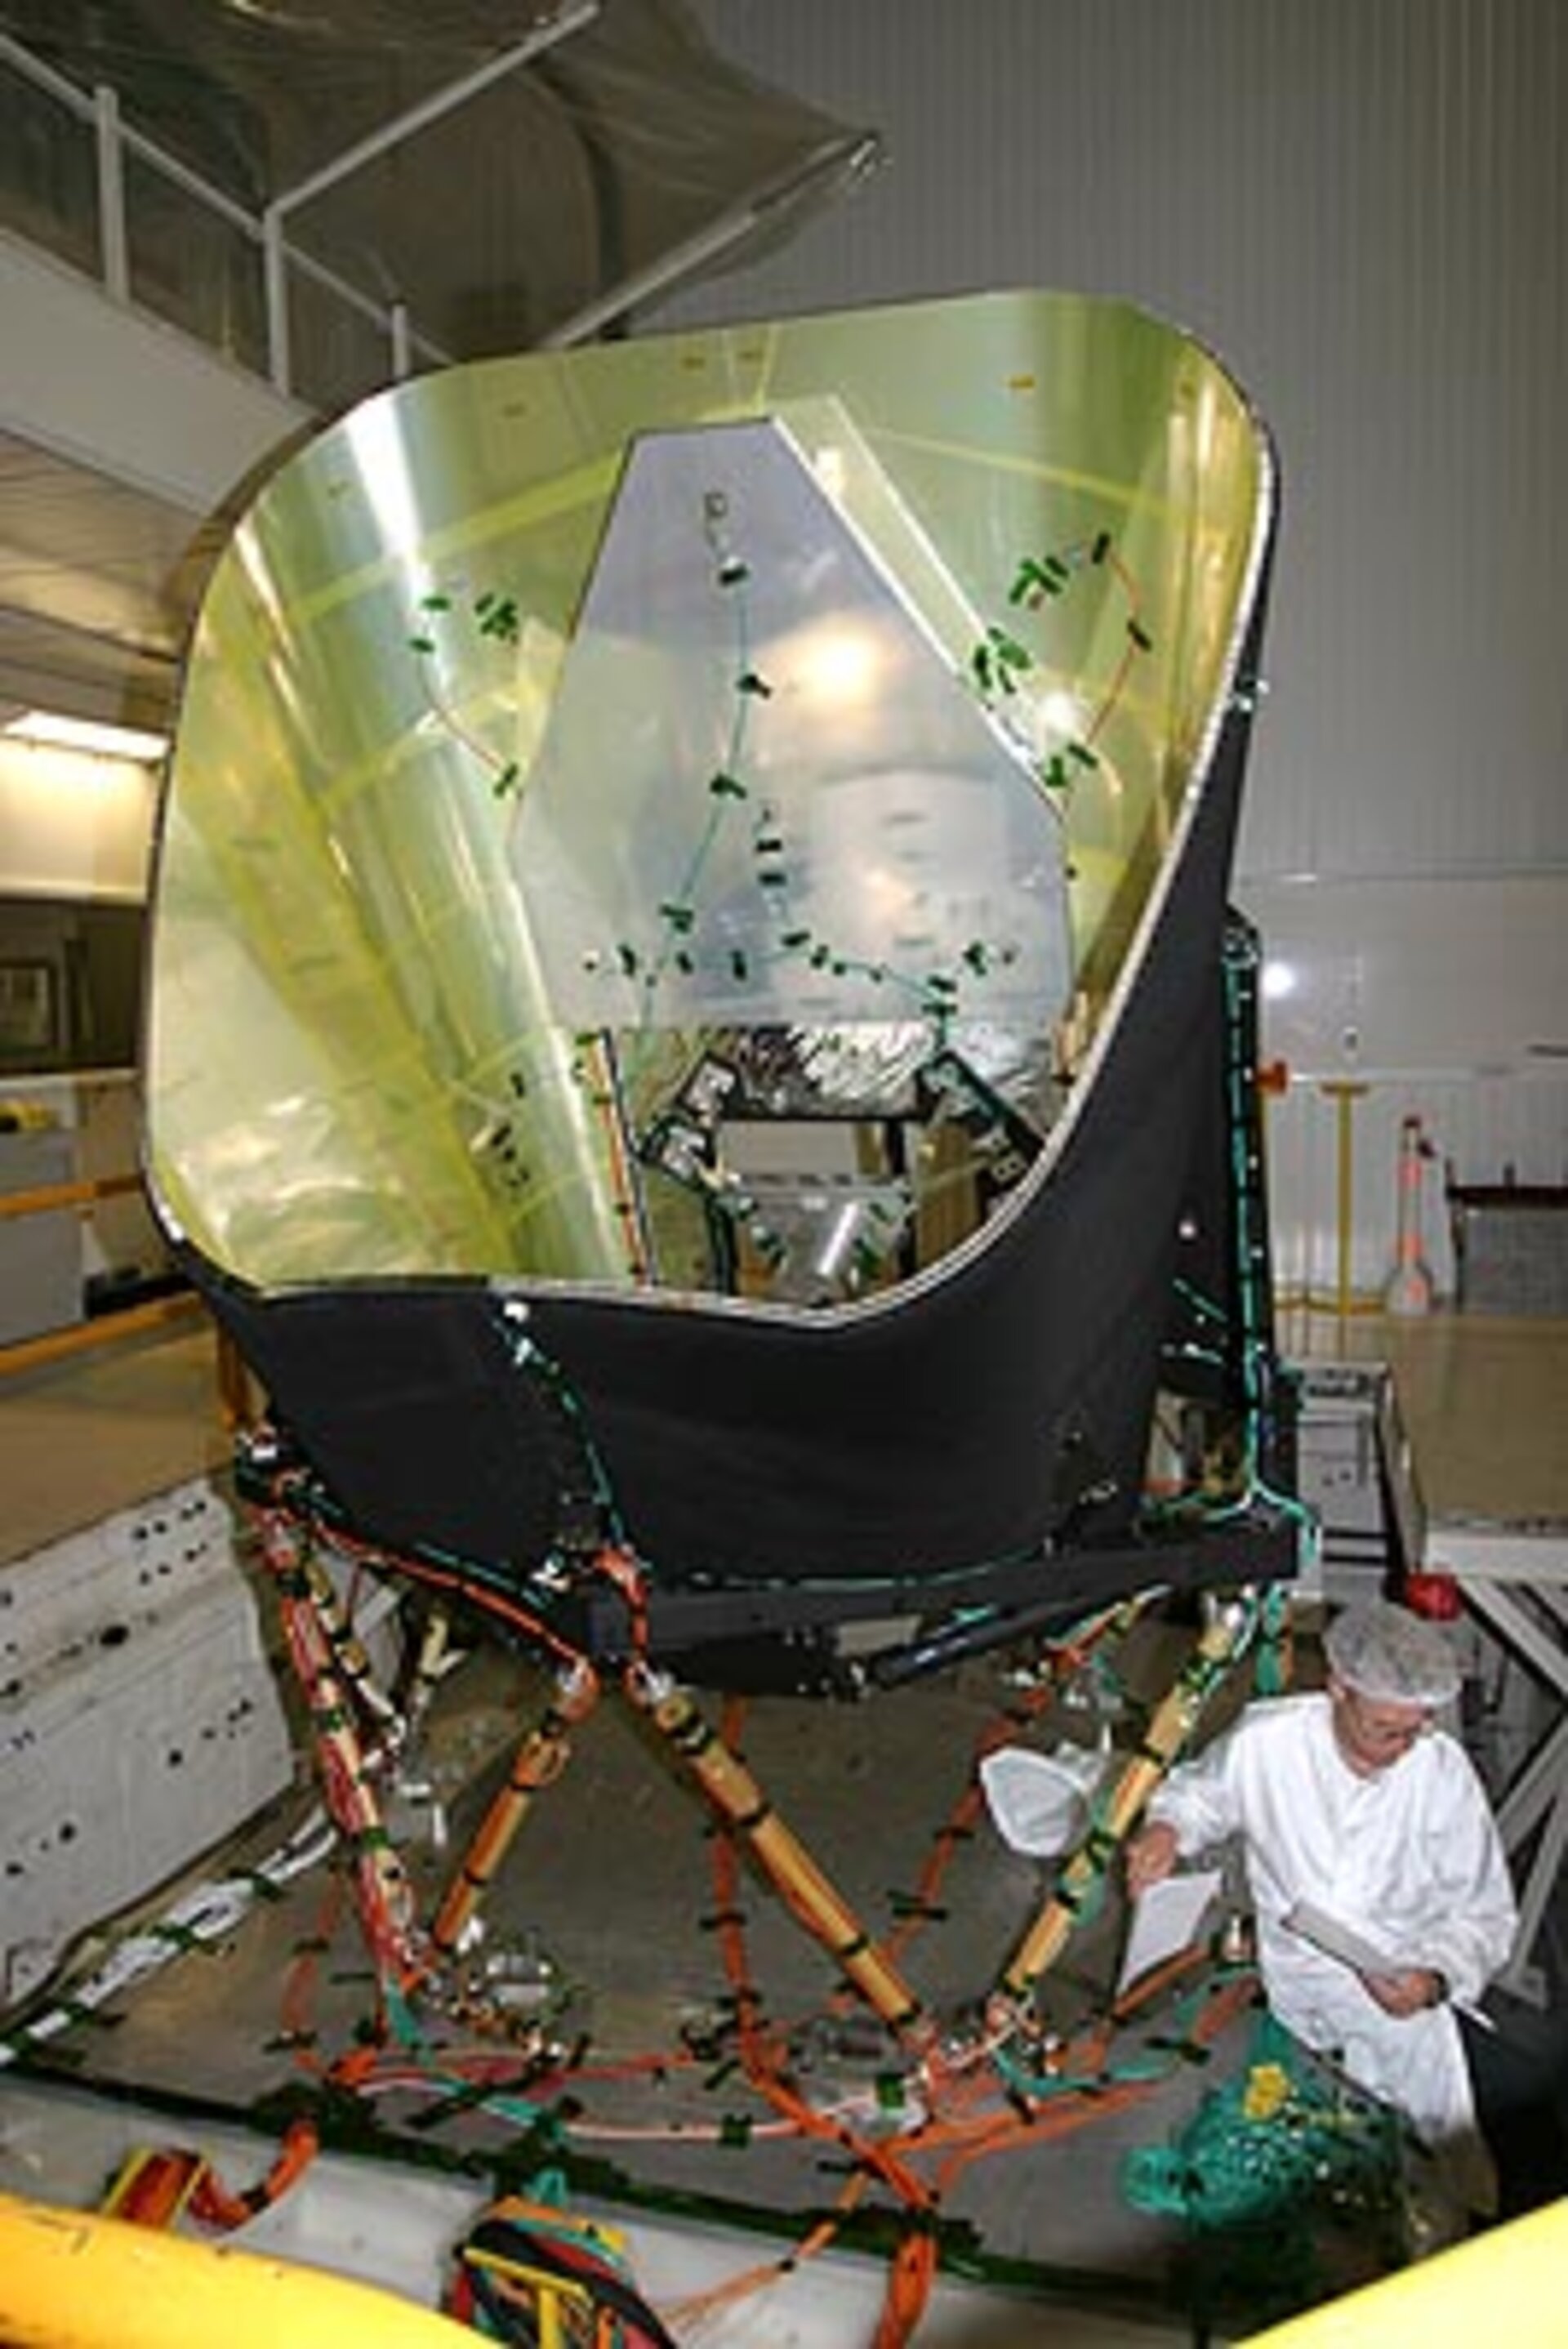 The structure of Planck's telescope